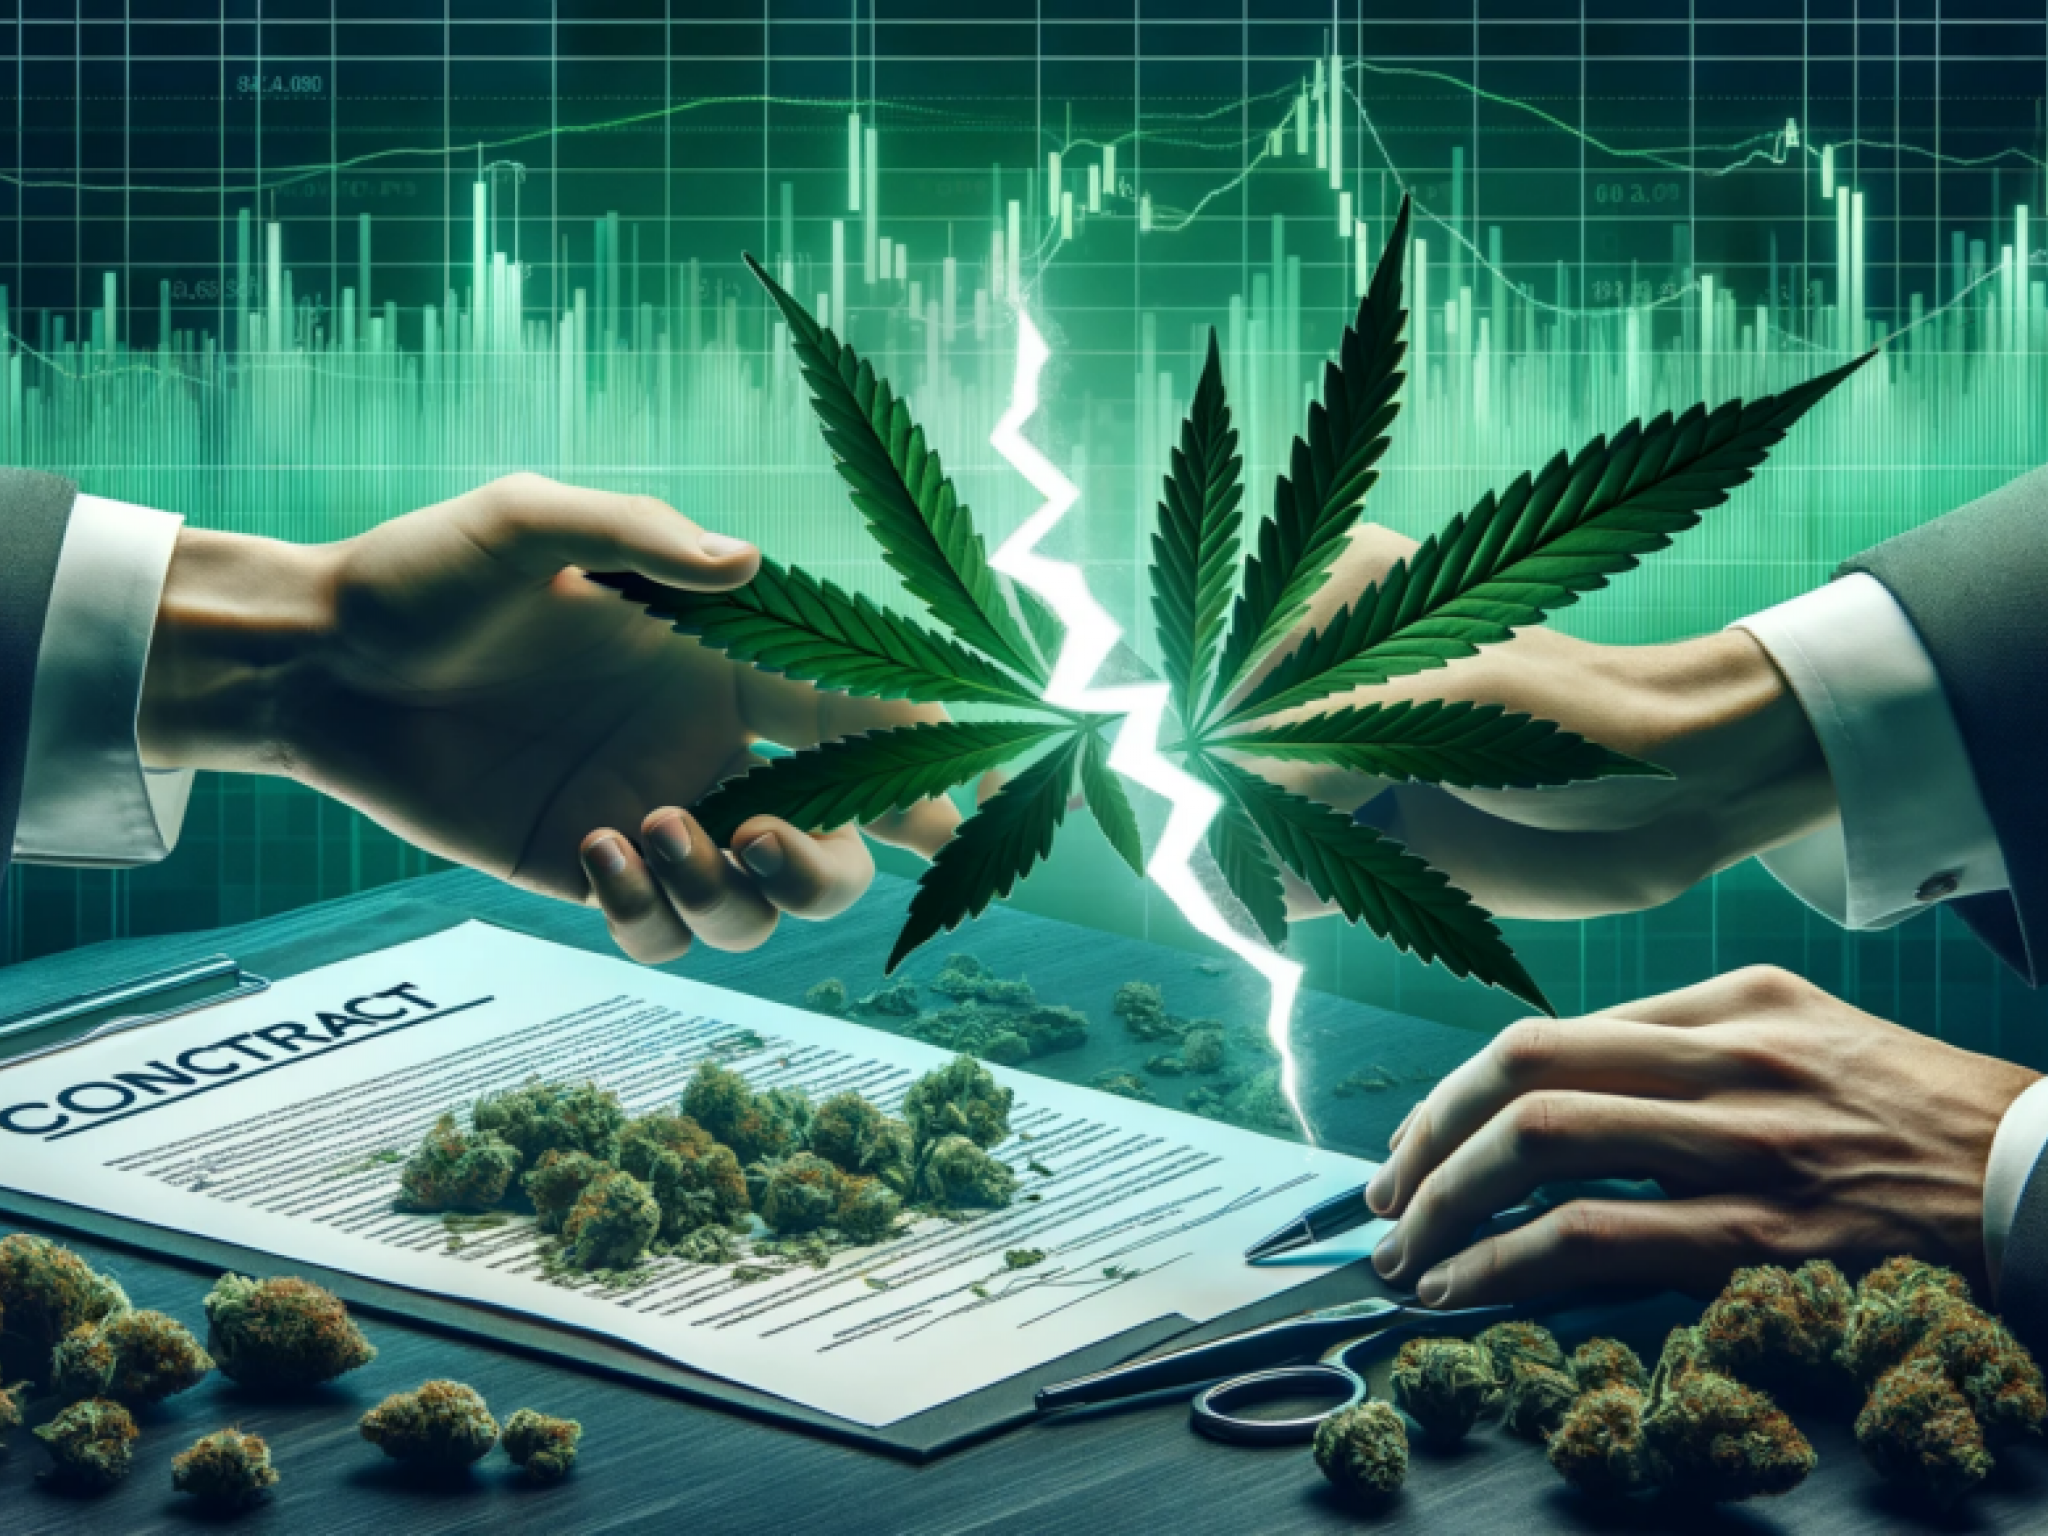  cannabis-merger-canceled-natures-miracle-and-agrify-terminate-agreement-citing-unfavorable-market-conditions 